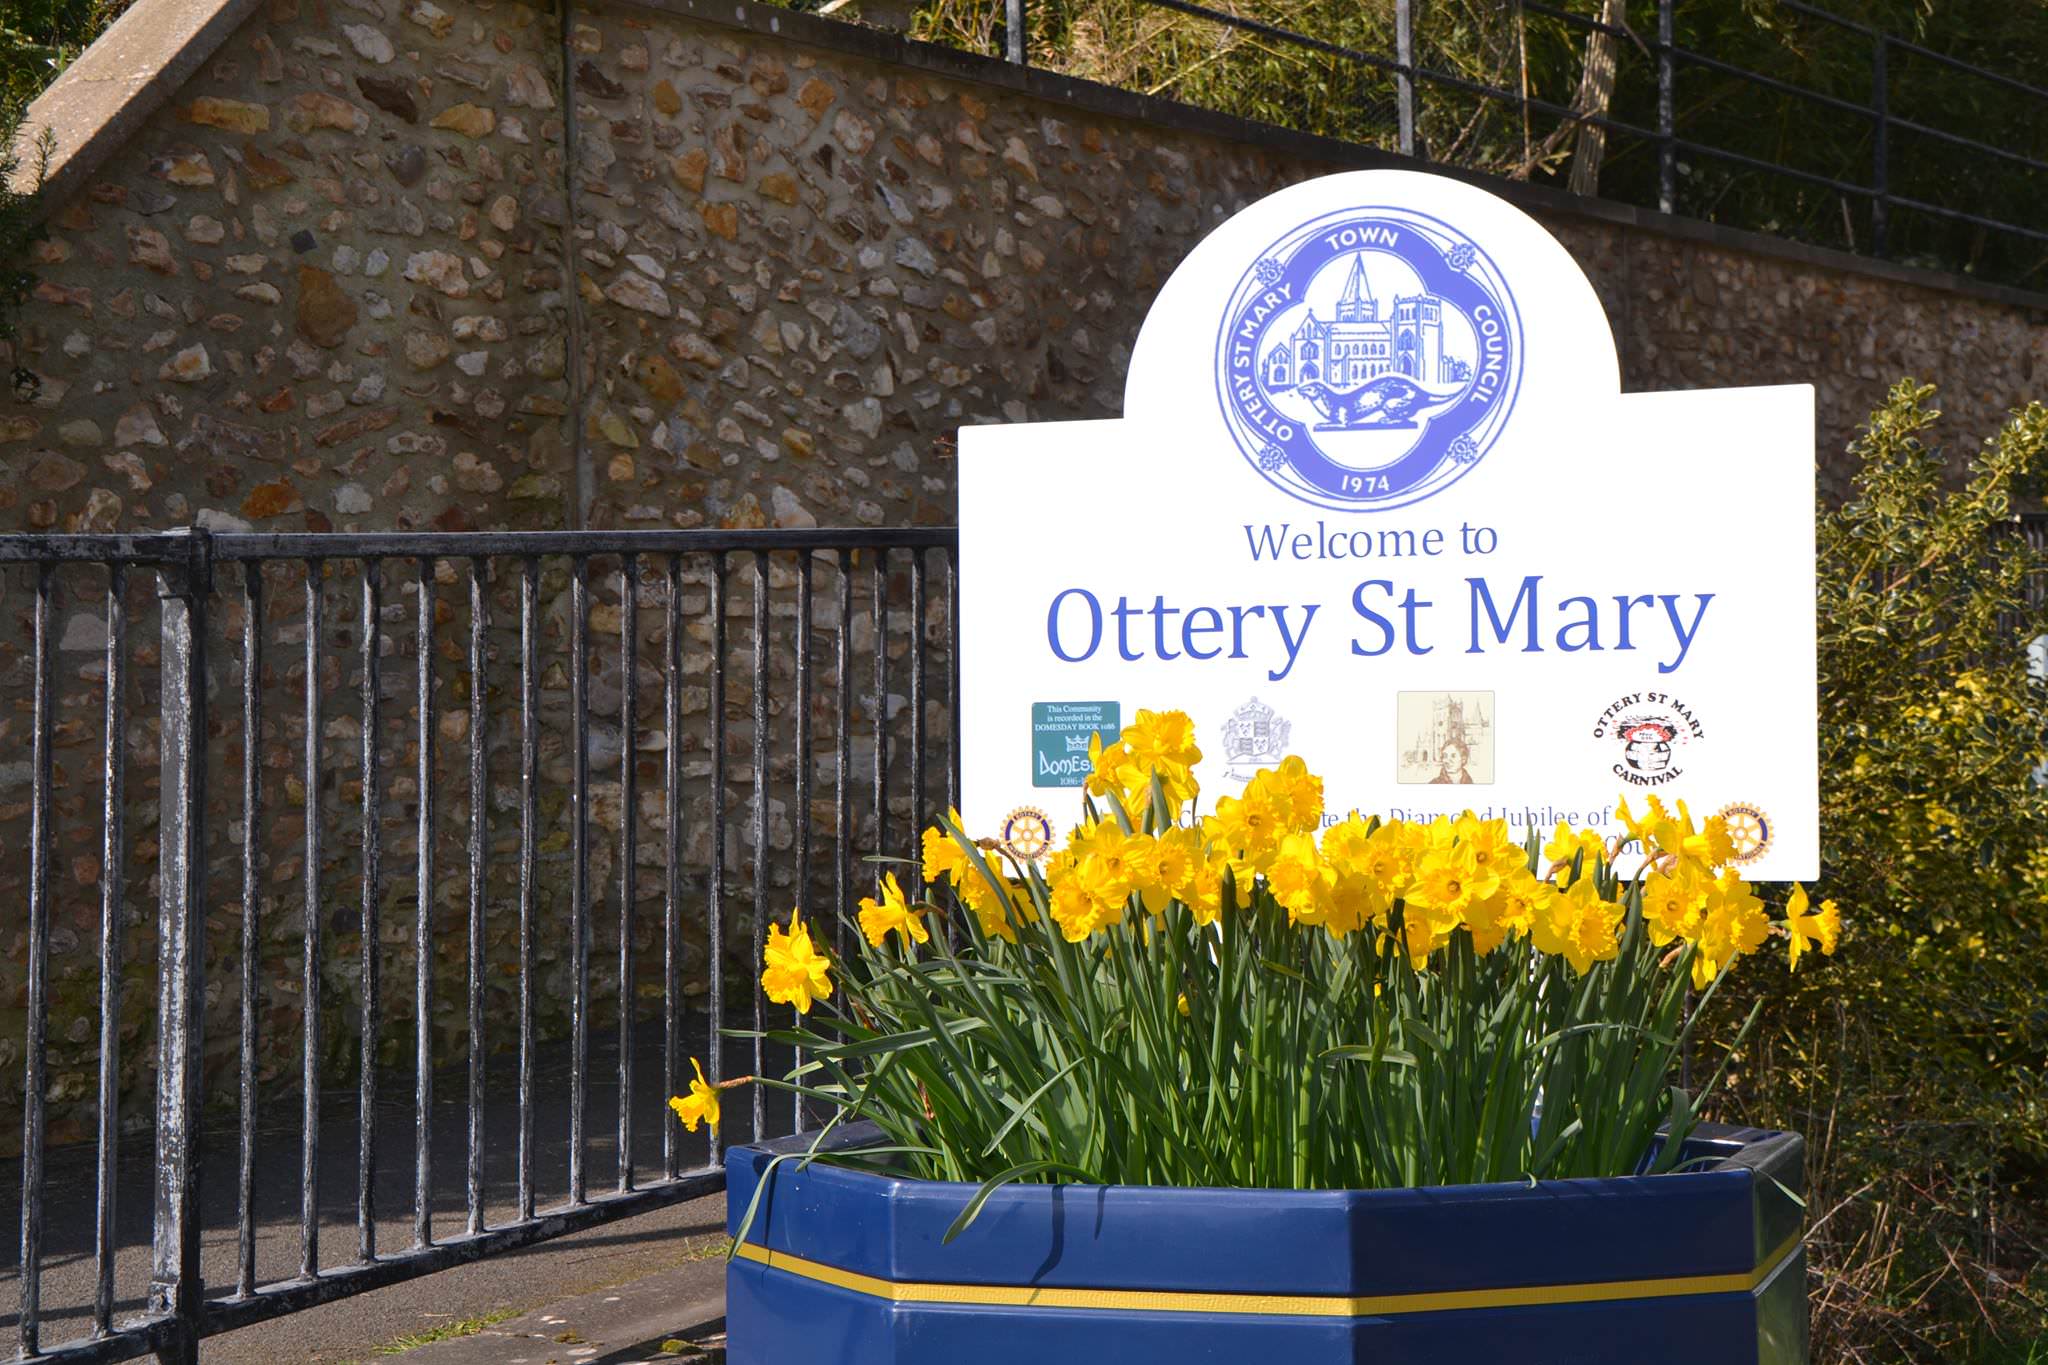 Welcome to Ottery St Mary in East Devon